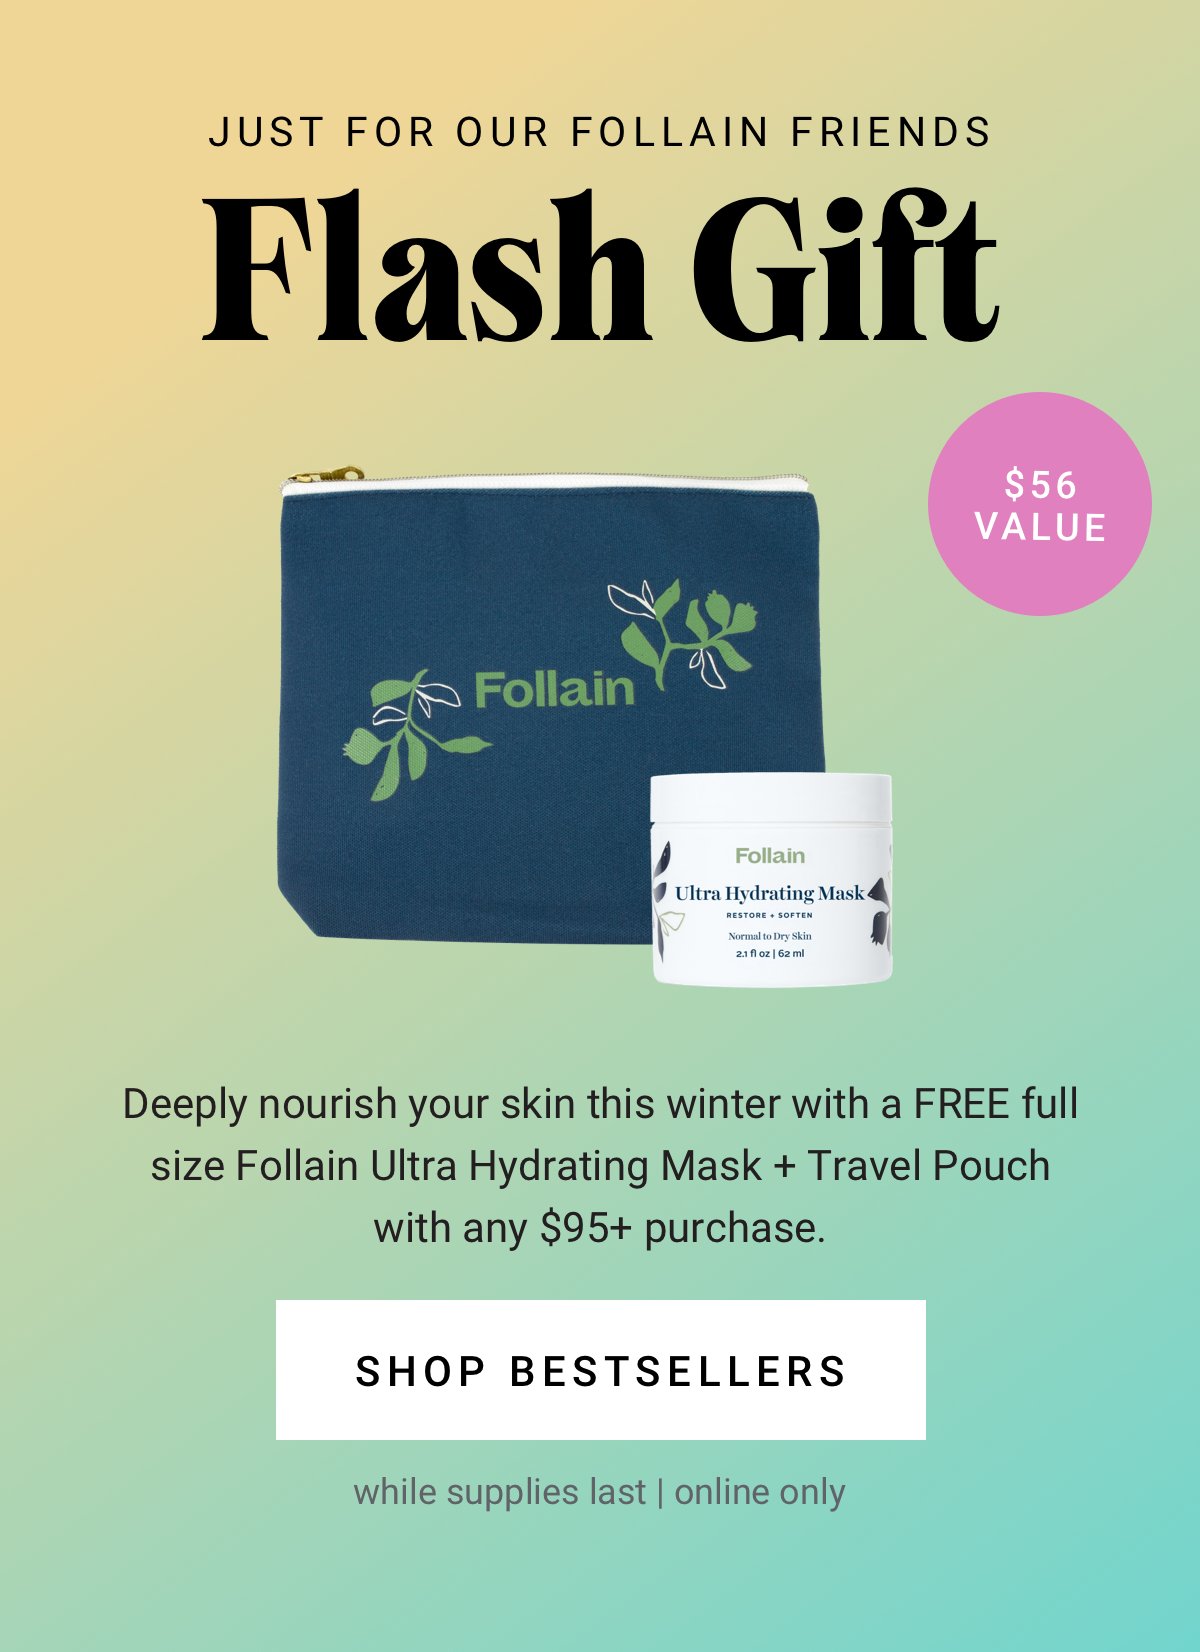 Free full size Follain Ultra Hydrating Mask + Travel Pouch with any $95+ purchase. Shop Bestsellers